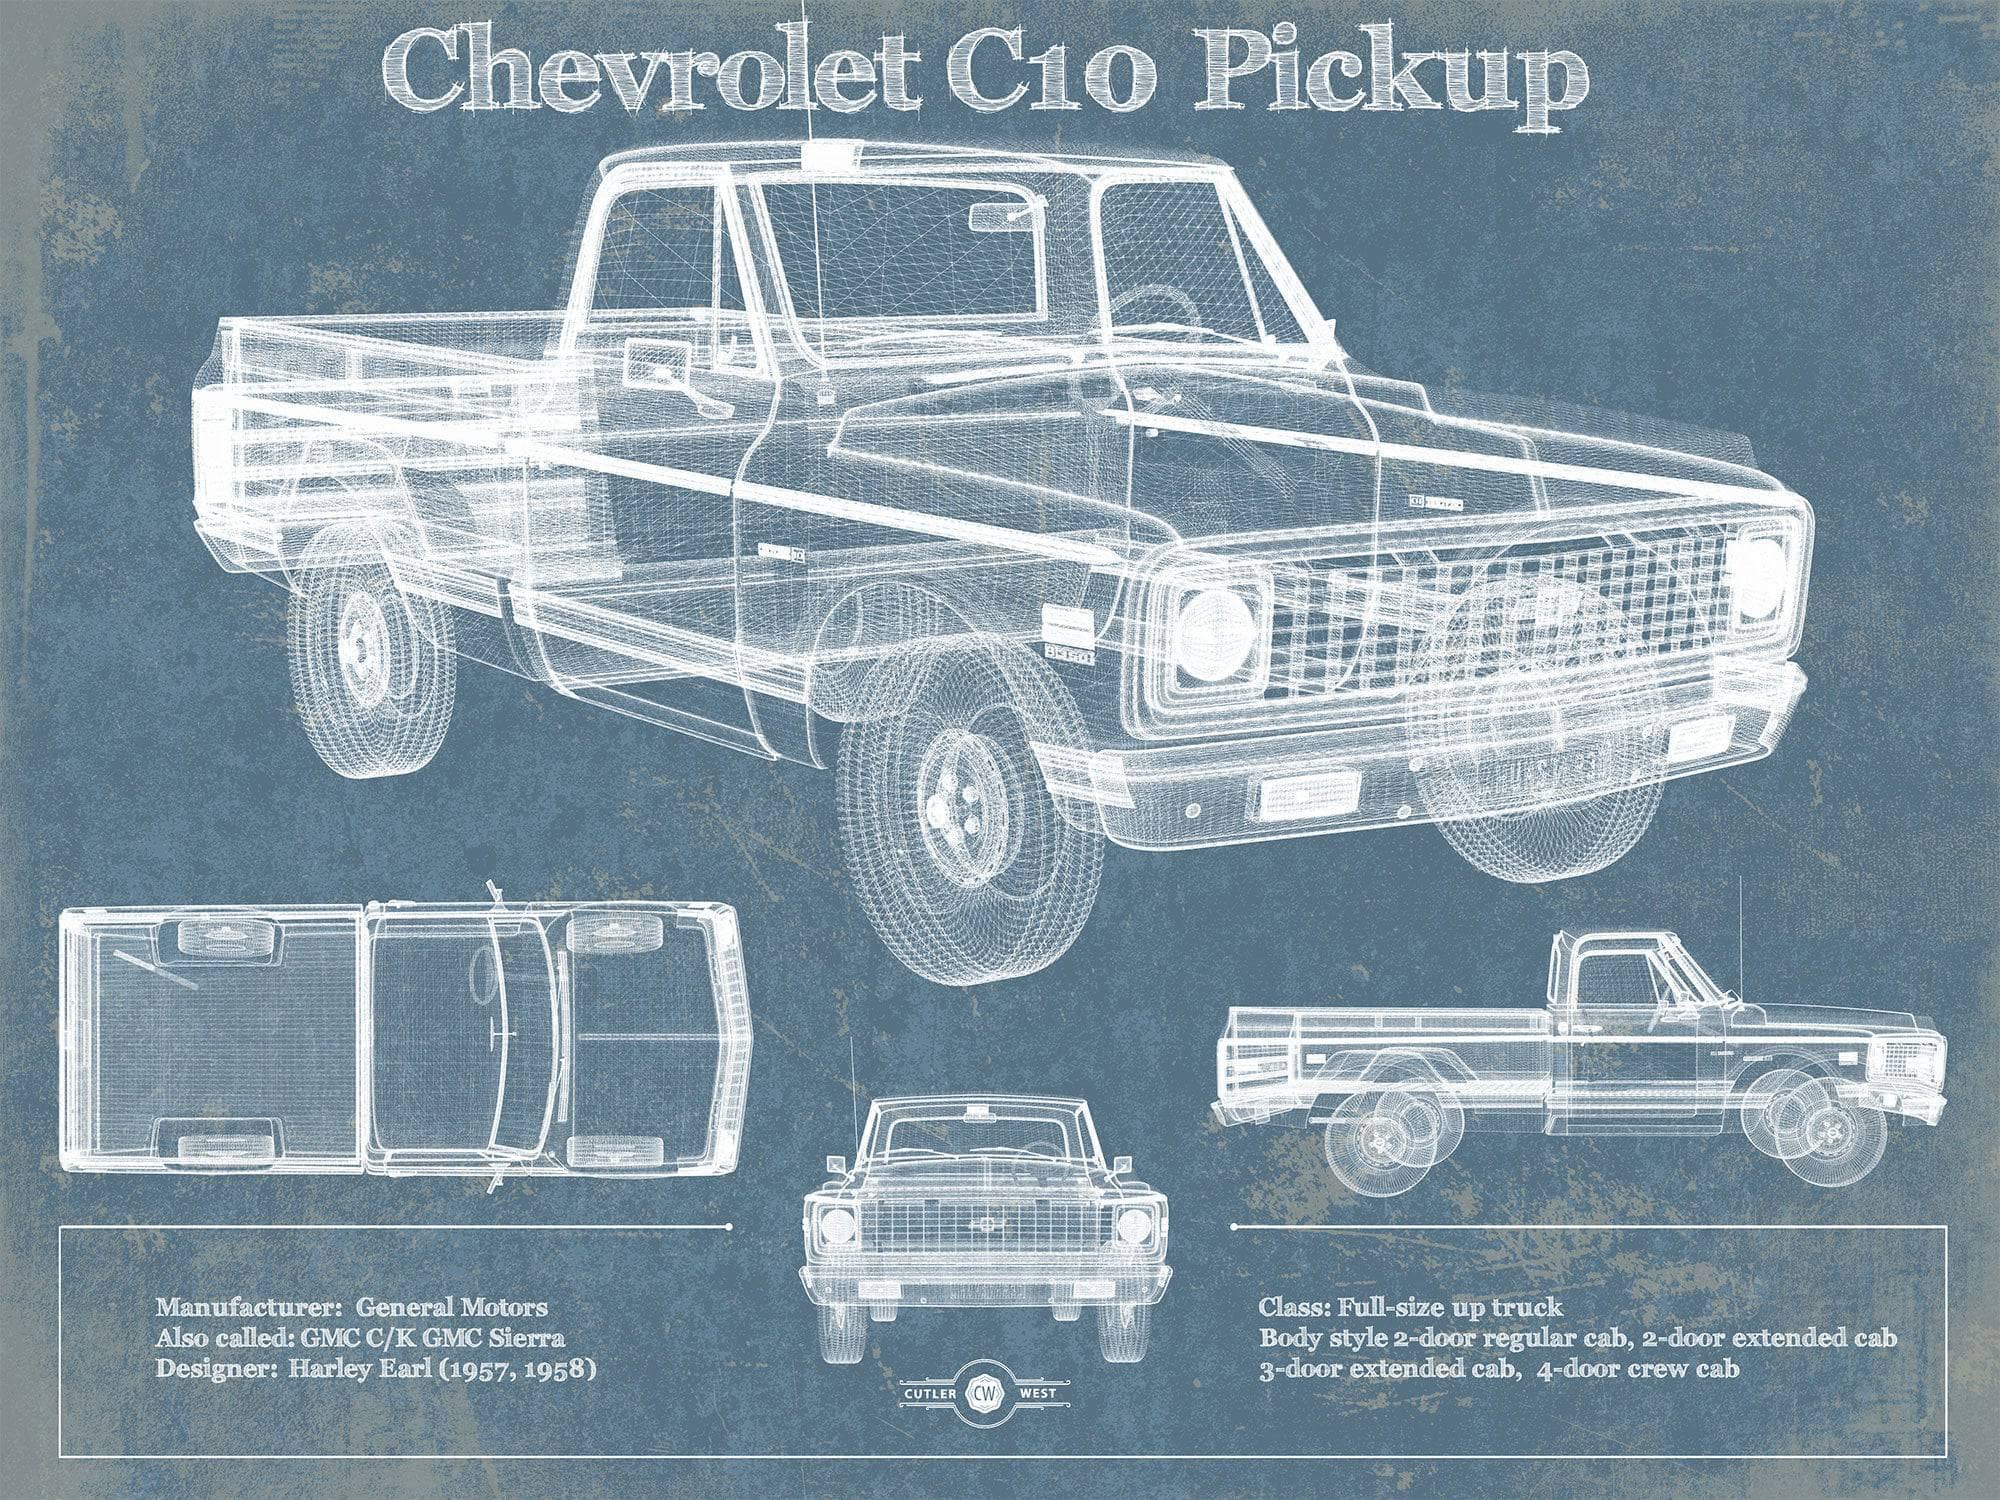 Cutler West Chevrolet Collection Chevy C10 Pickup 2nd Generation Vintage Blueprint Auto Print